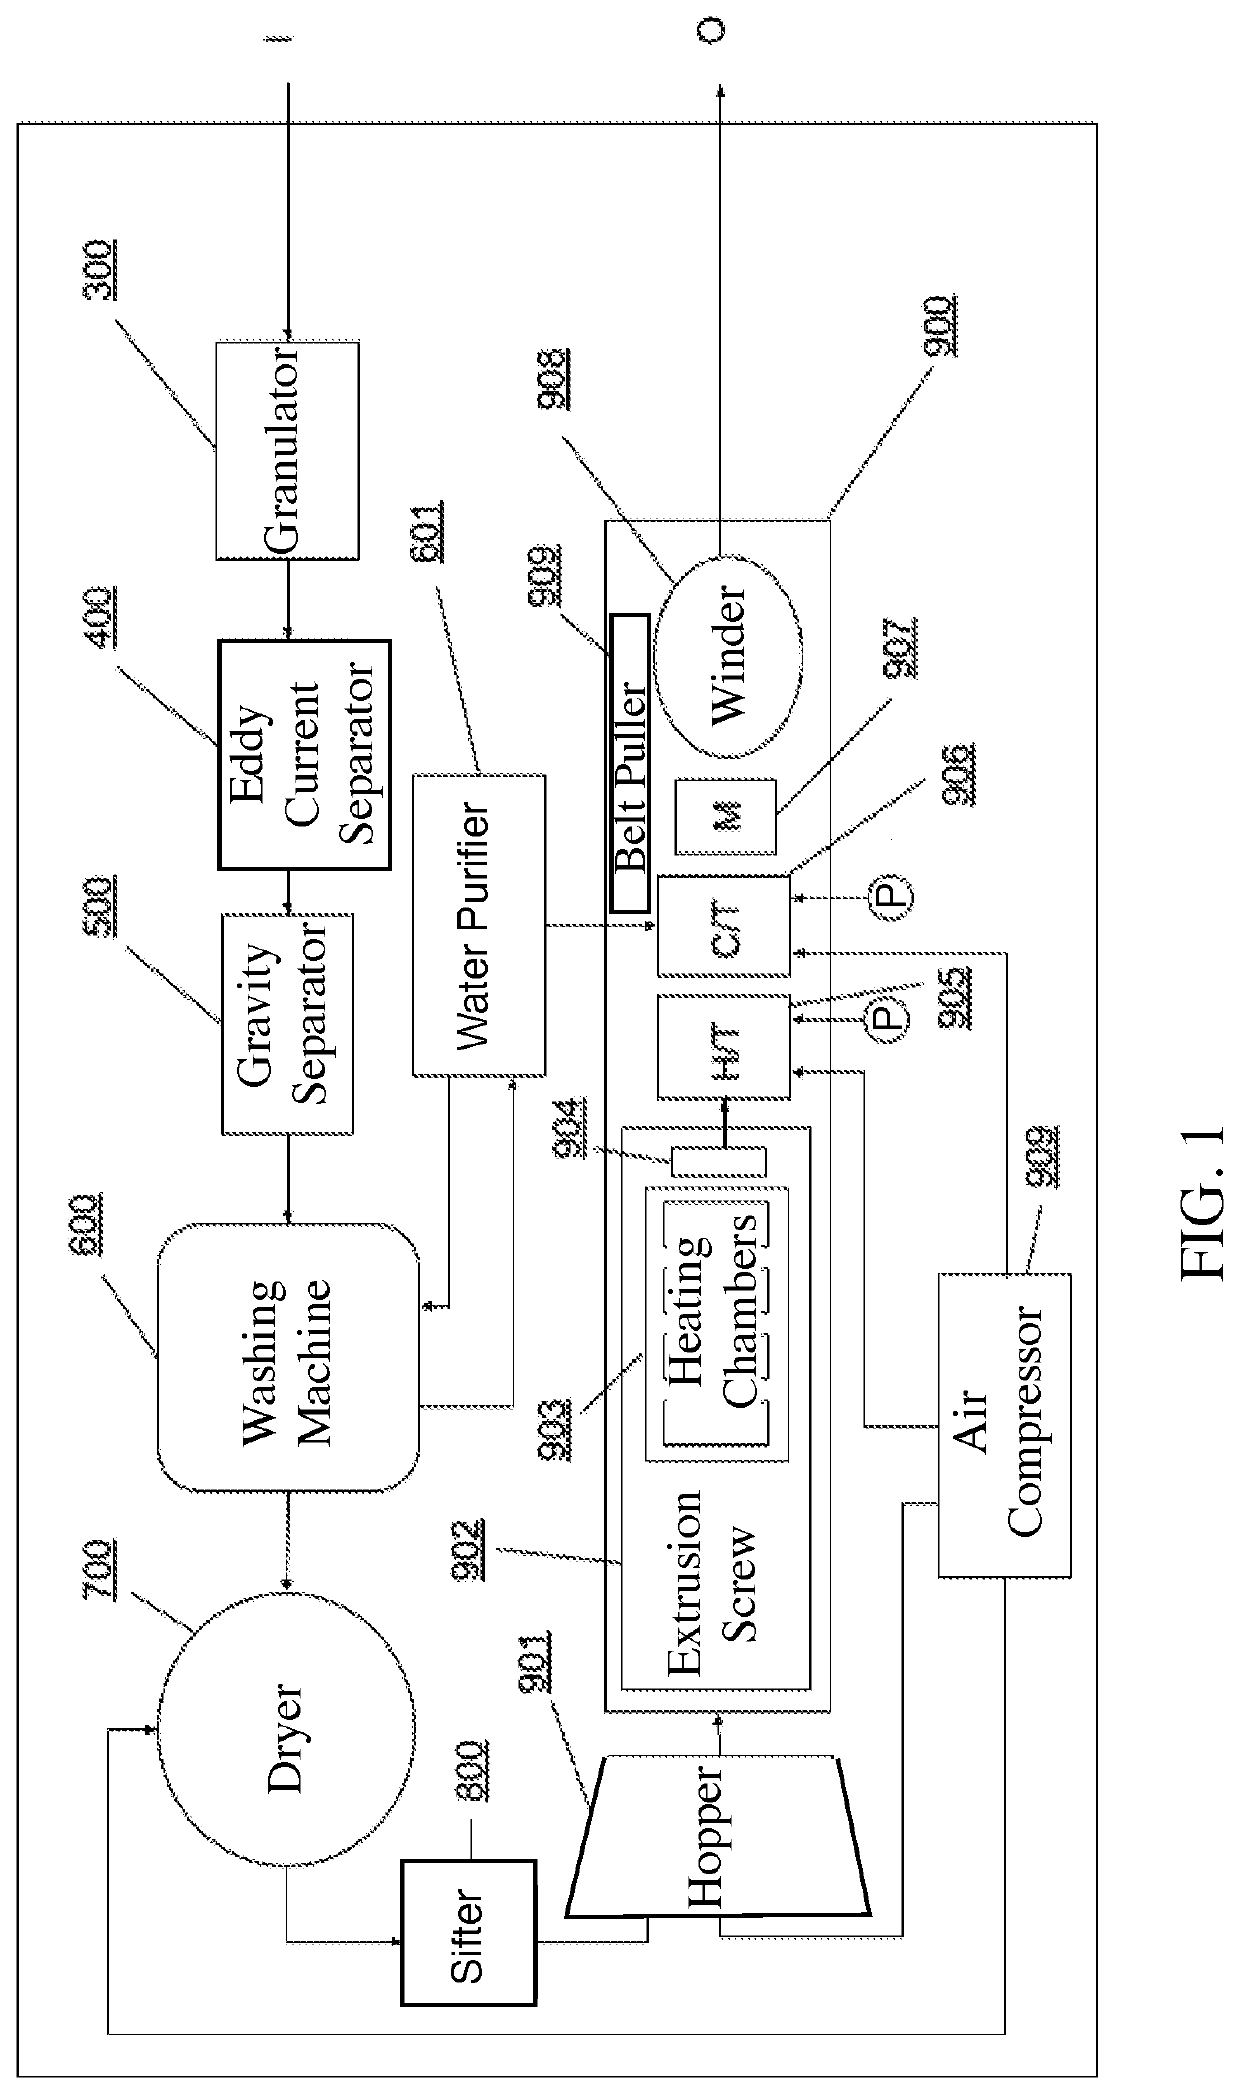 Method and Apparatus for Recycling Post-Consumer Plastic Waste